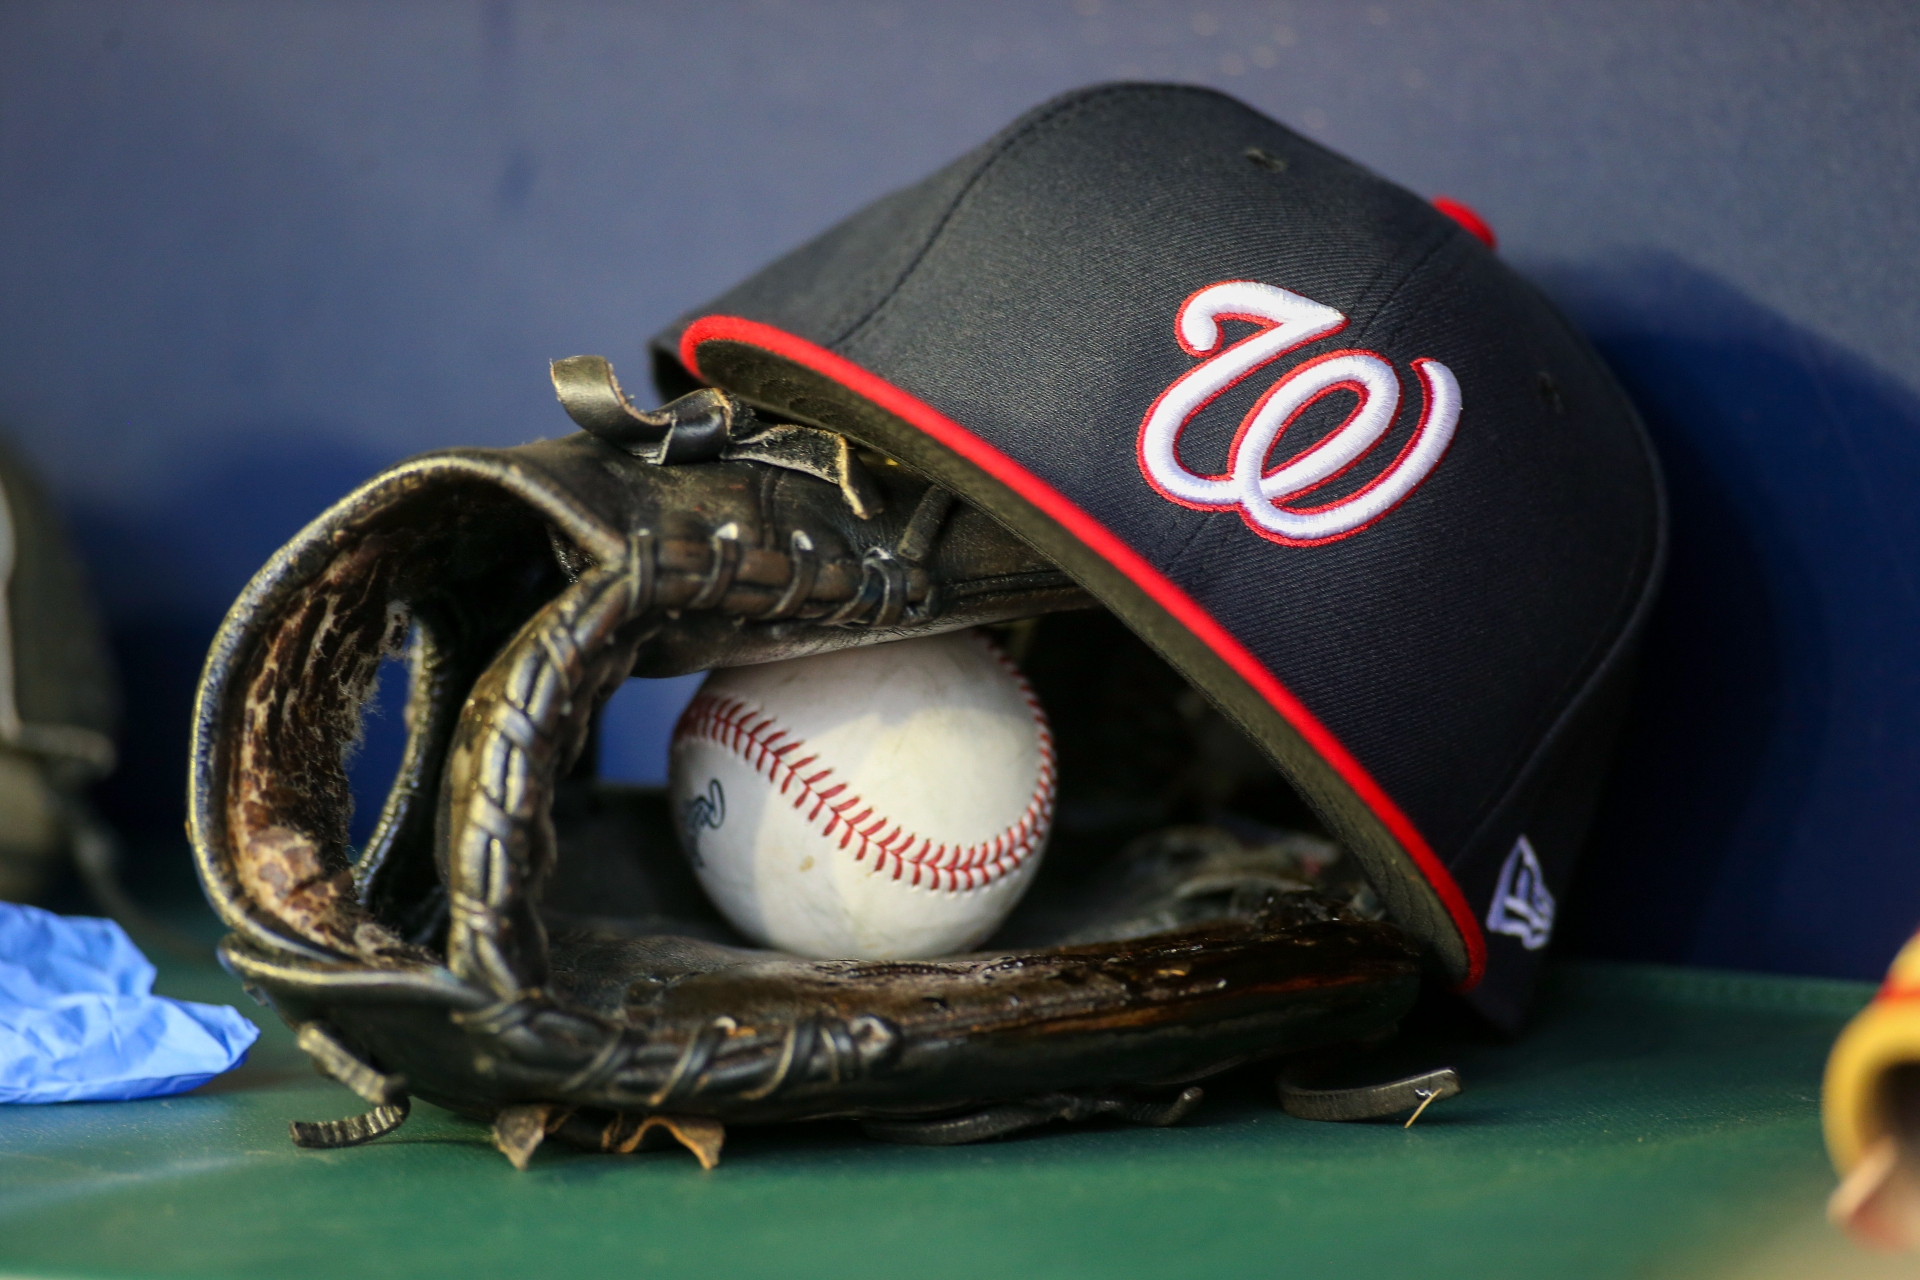 Nationals to Play in 2023 MLB Little League Classic in Williamsport Vs. Nationals